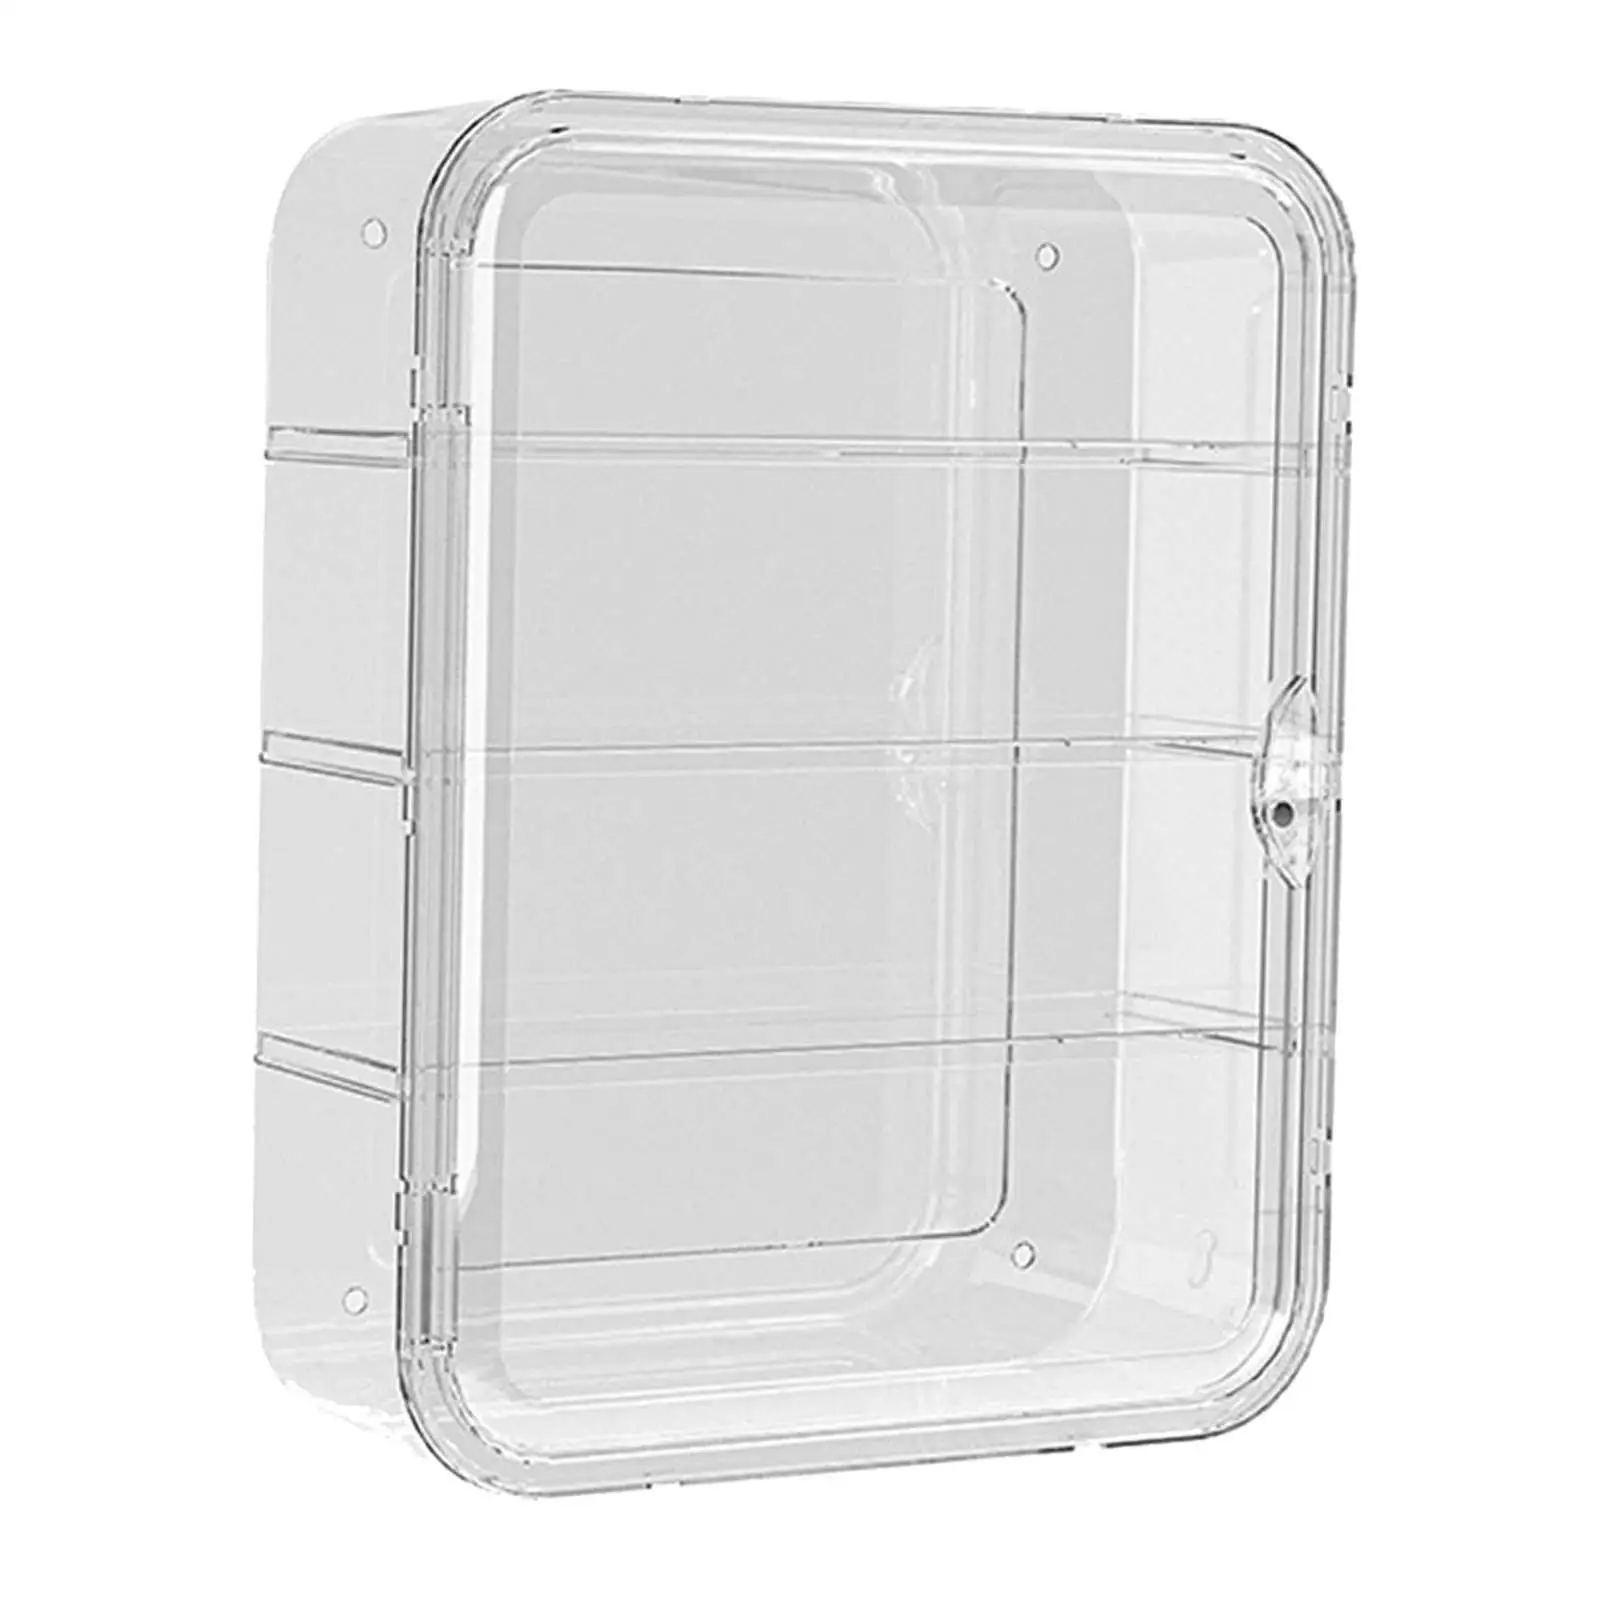 

Clear Figurine Display Box Dustproof Wall Mounted Display Shelves Rack for Spice Can Stones Action Figures Collections Mini Toys